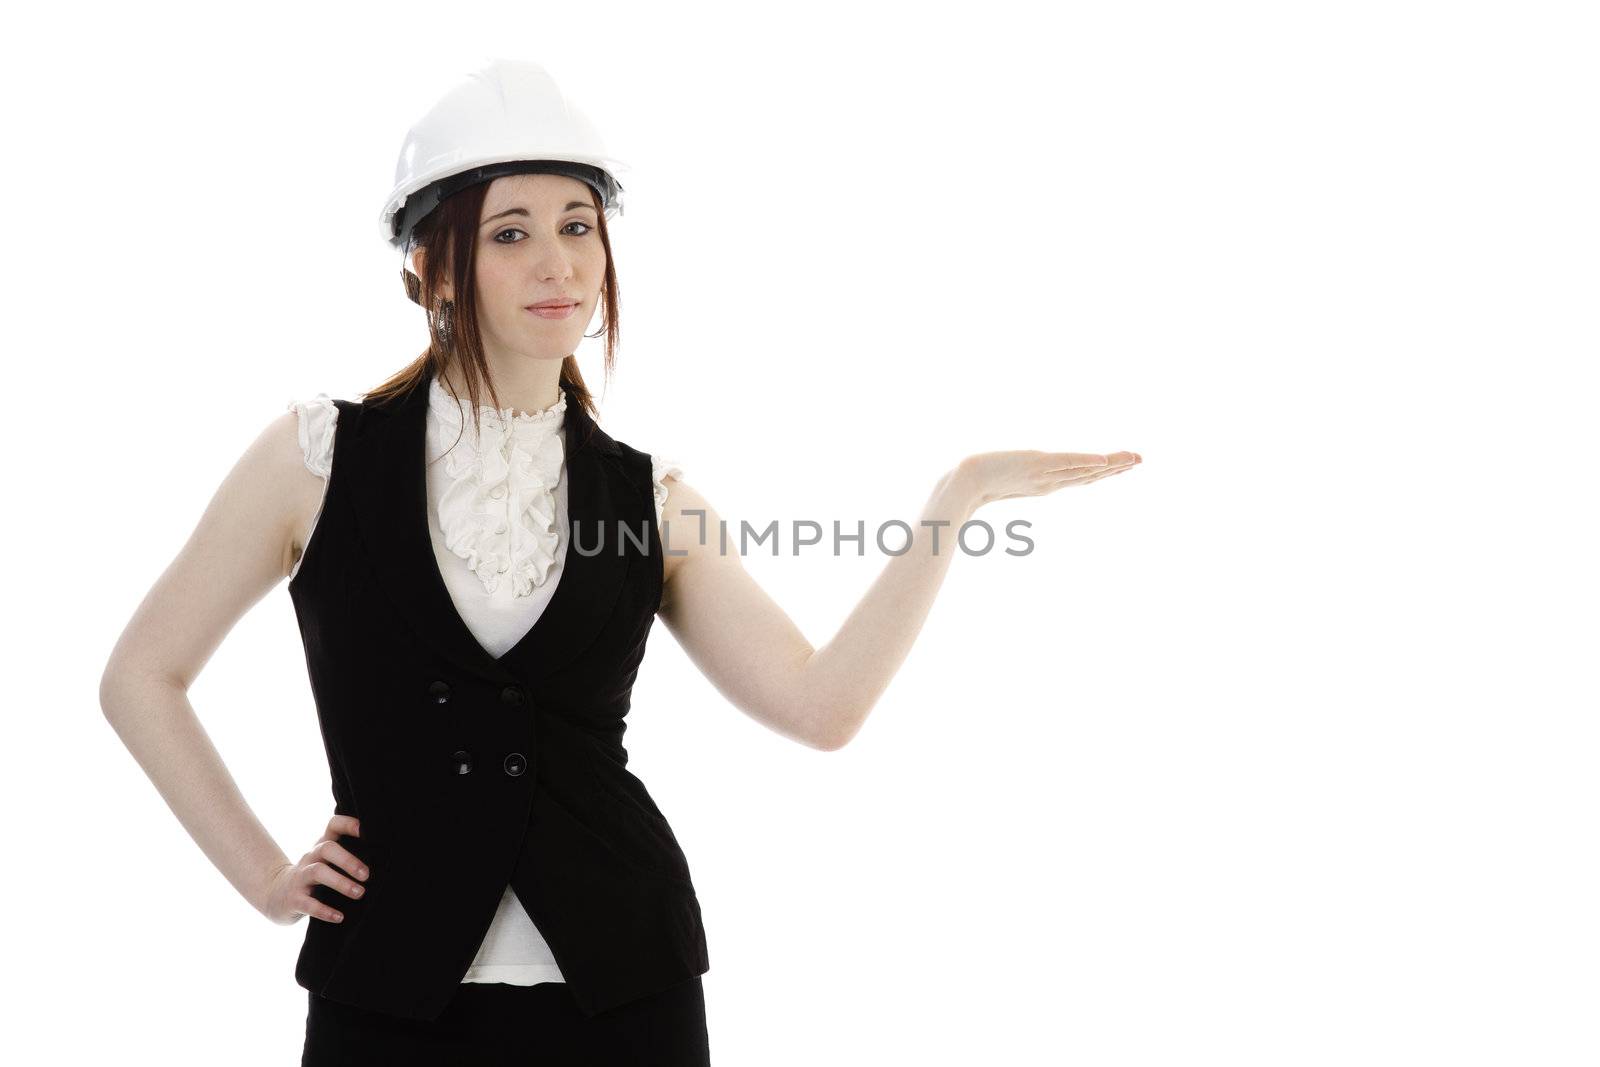 Young business woman wearing a business suit and construction had holding her hand as if presenting something against a white background